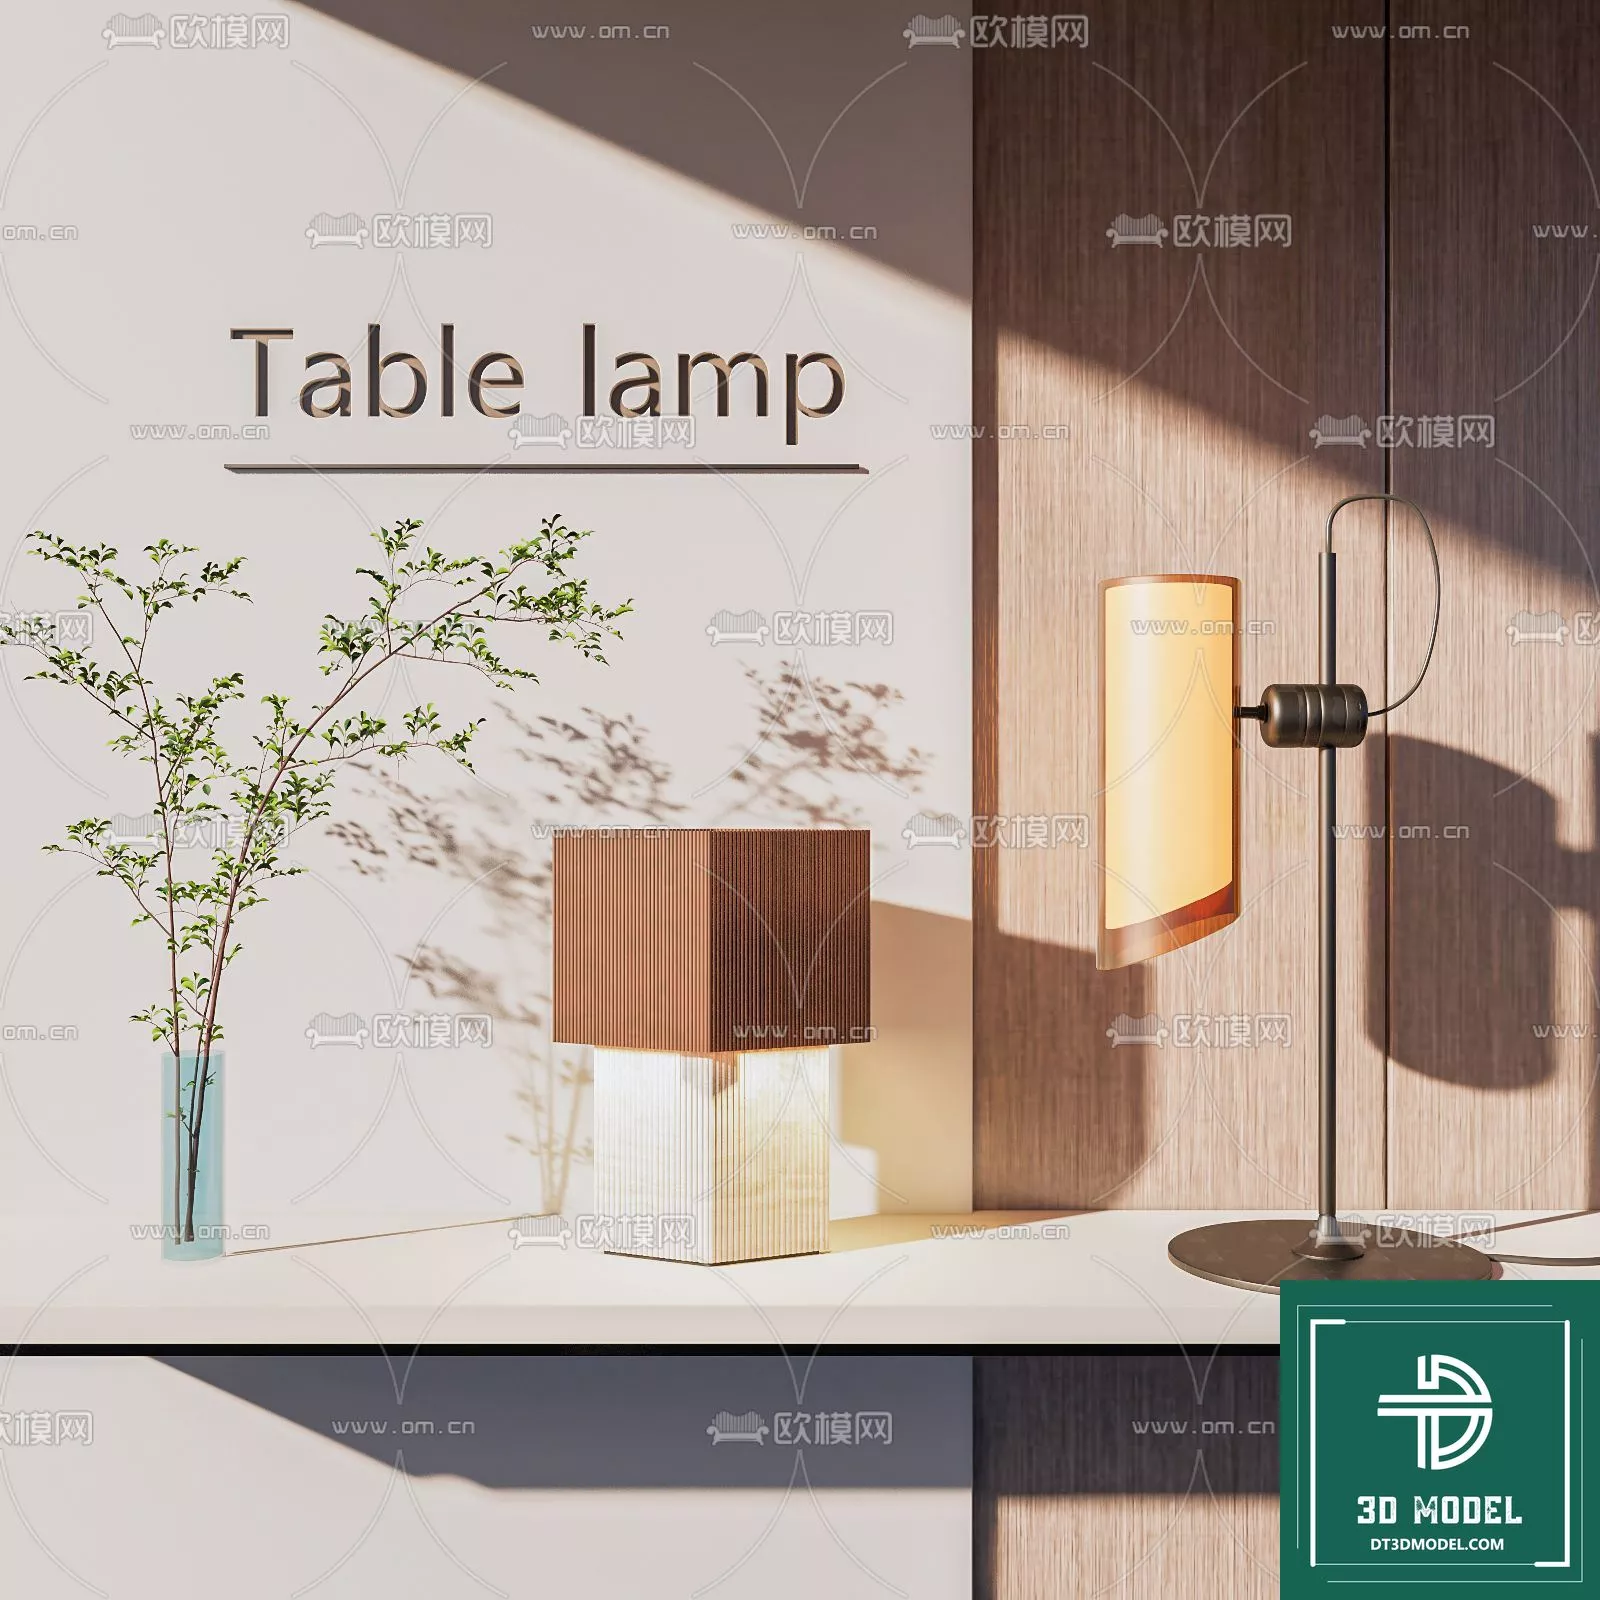 MODERN TABLE LAMP - SKETCHUP 3D MODEL - VRAY OR ENSCAPE - ID14599